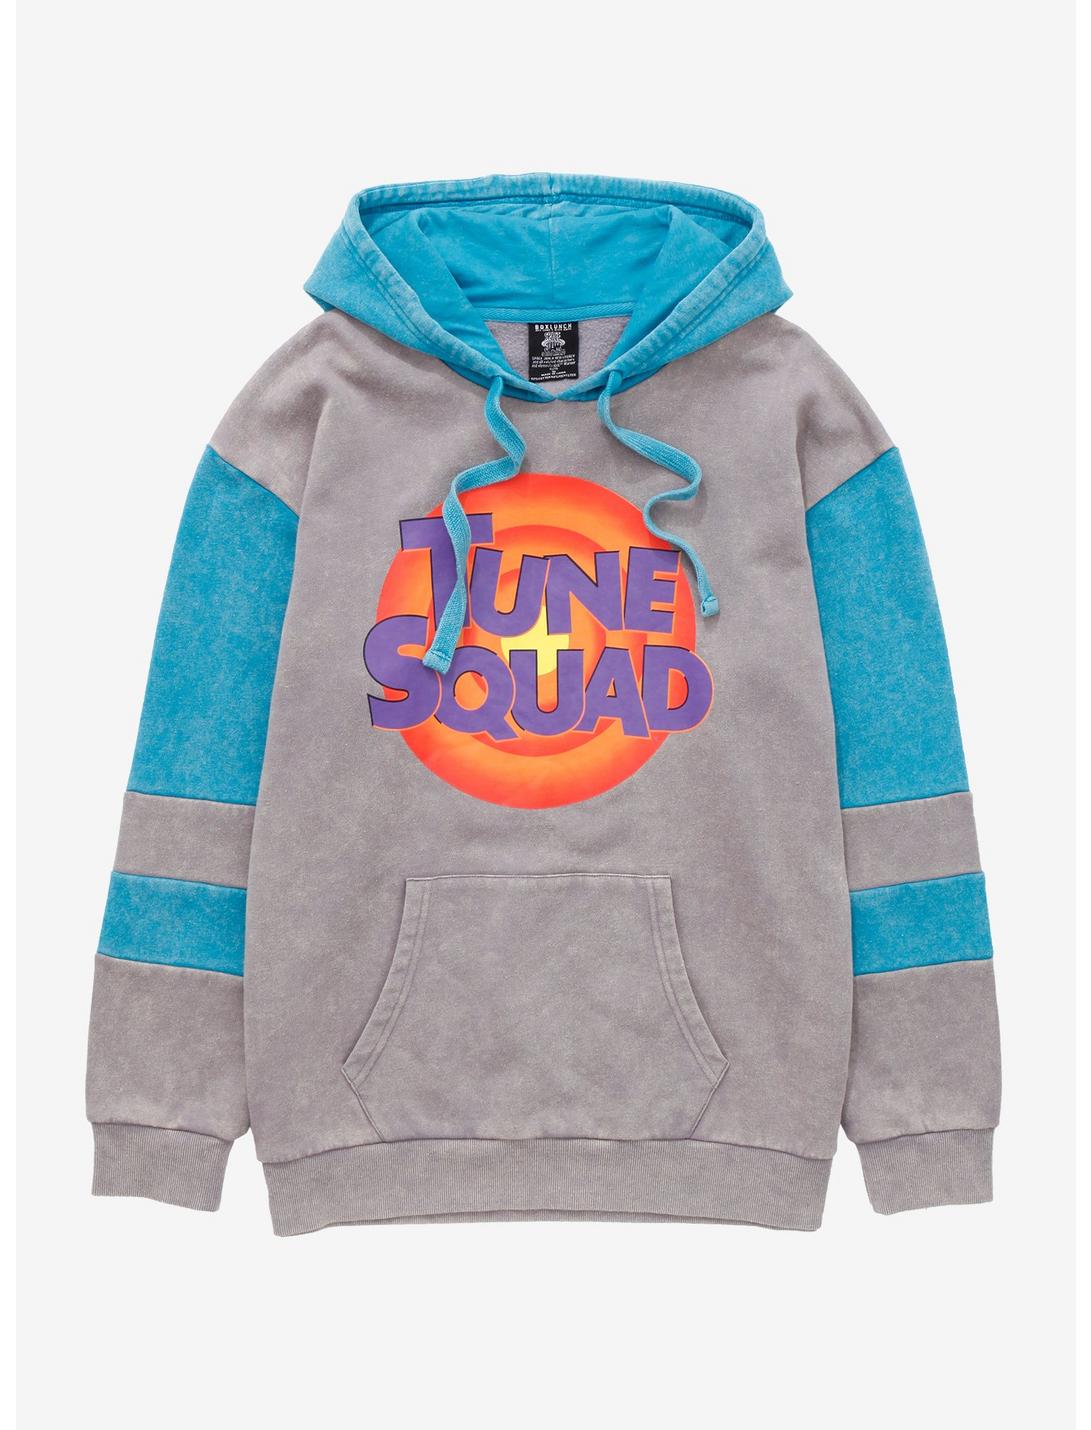 Space Jam: A New Legacy Tune Squad Women's Hoodie - BoxLunch Exclusive, DARK GREY, hi-res